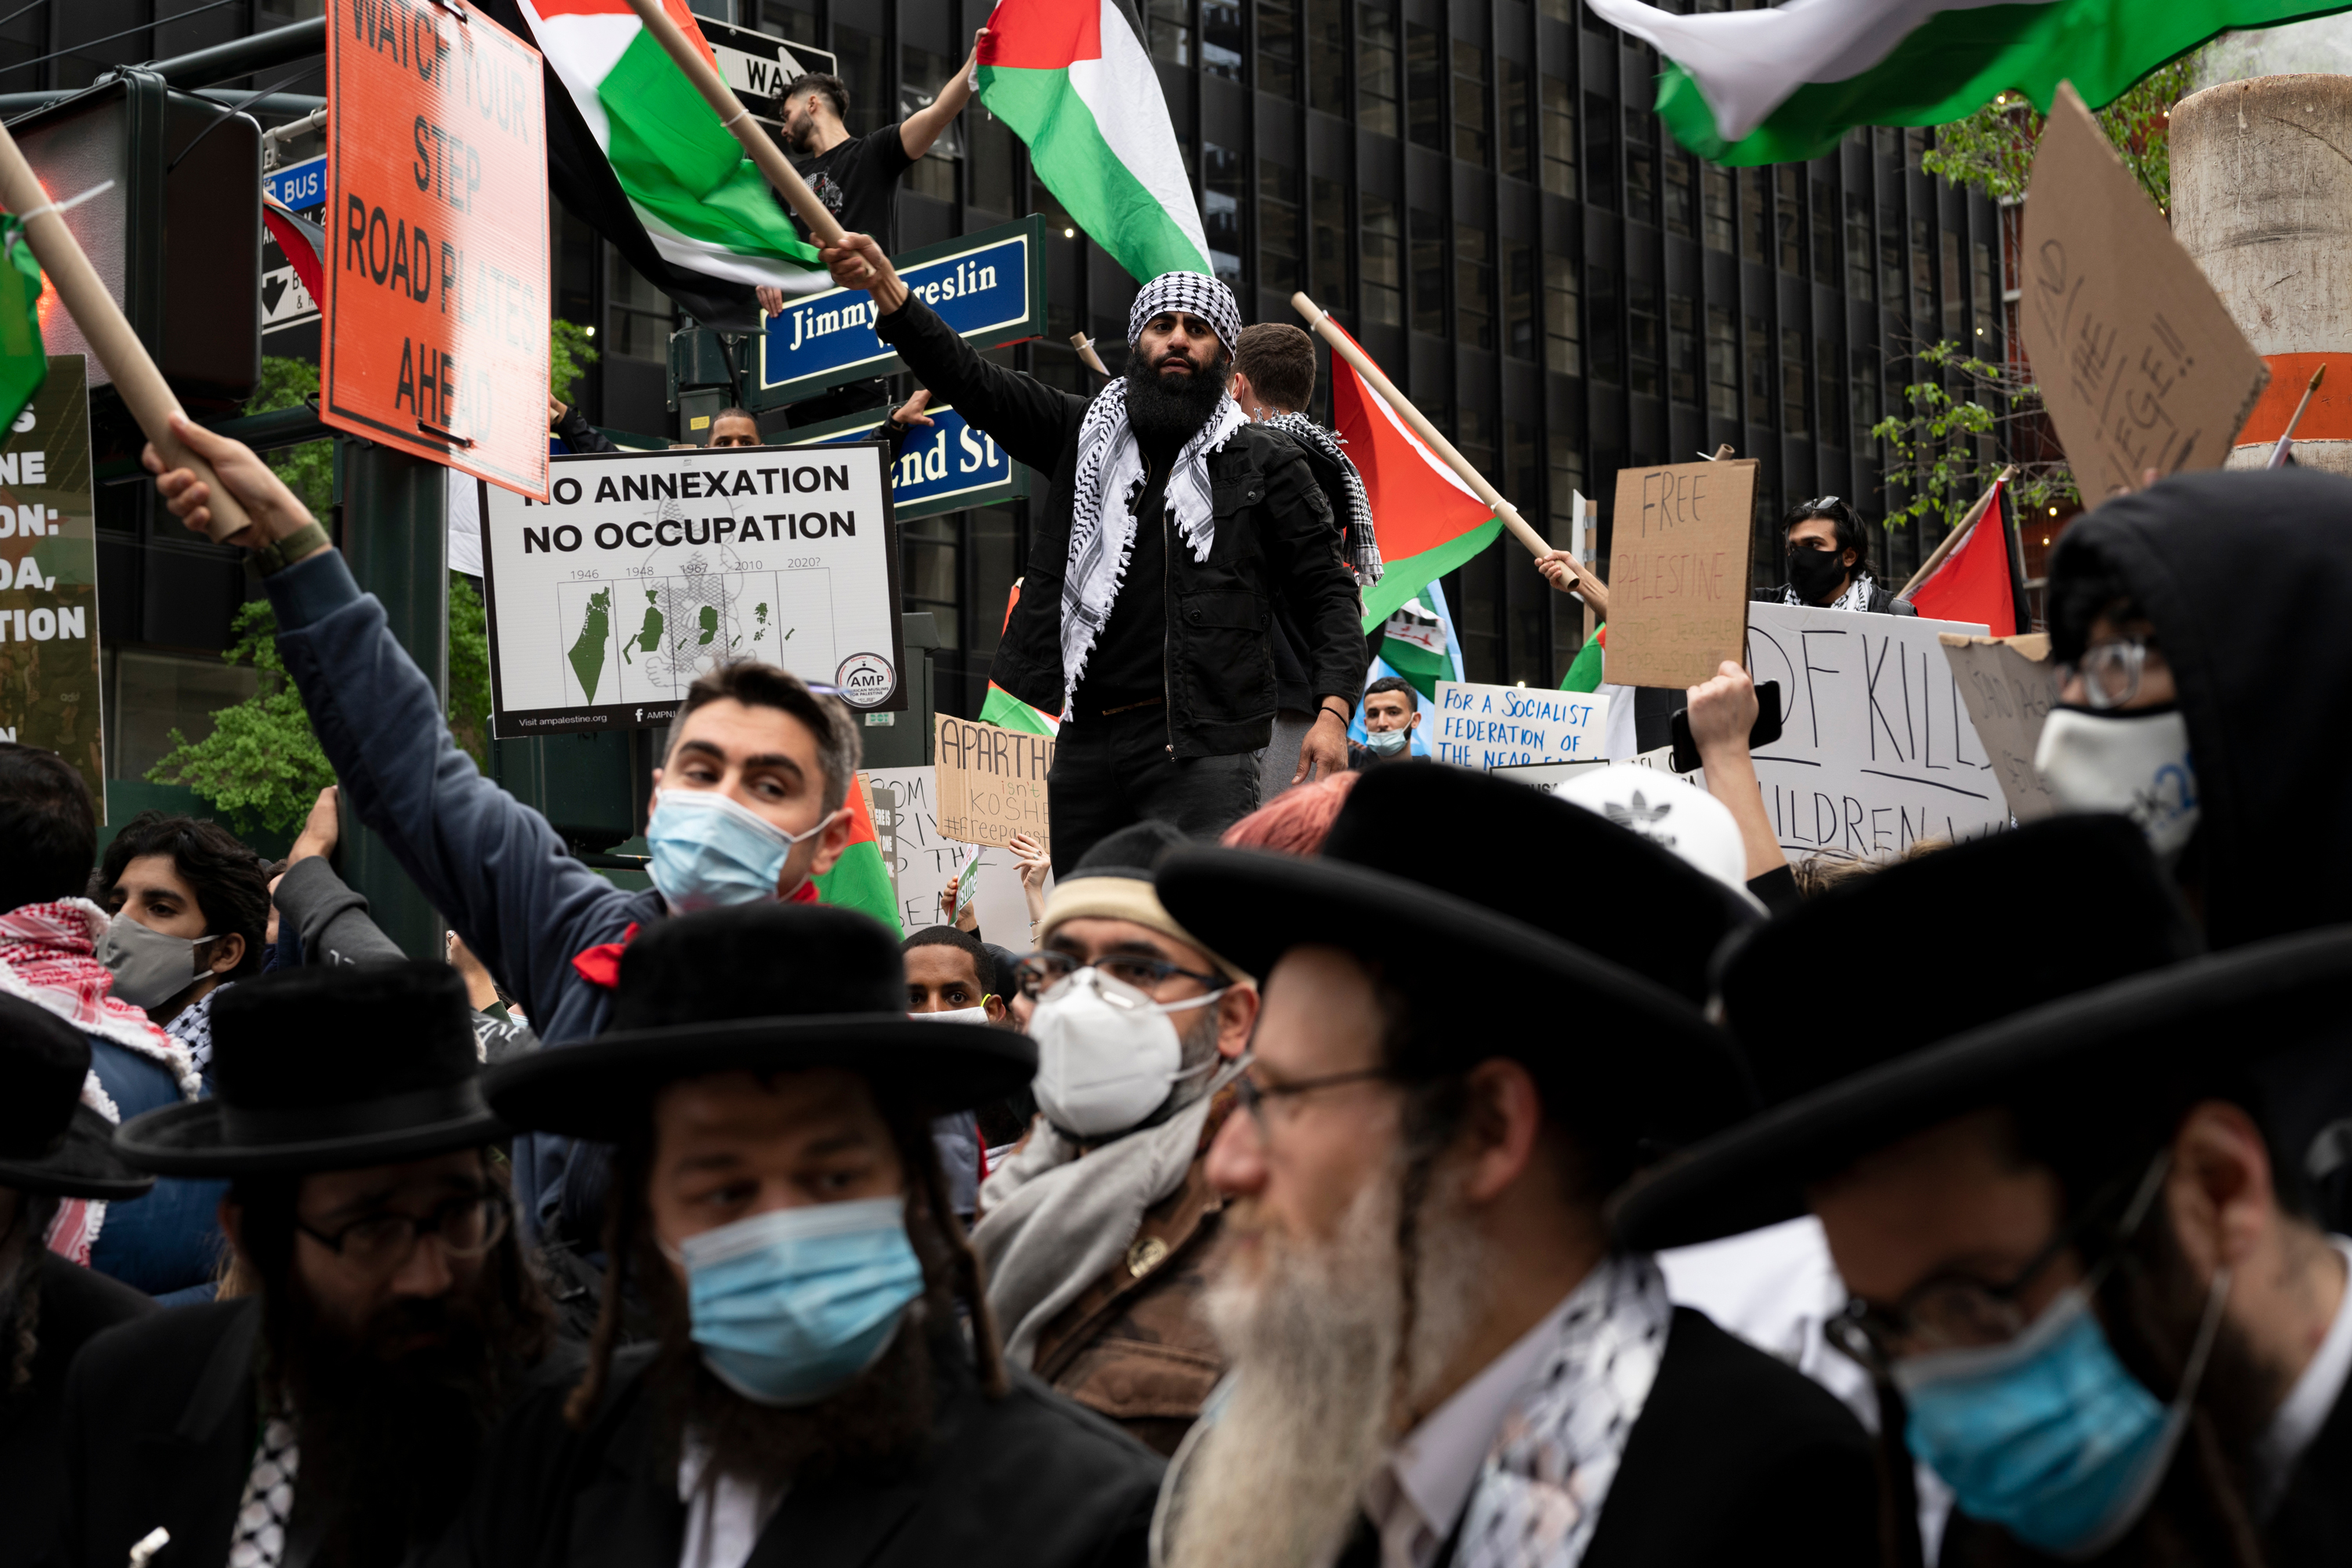 Pro-Palestinian-rights advocates rally in front of the Israeli consulate in New York City, May 11, 2021.